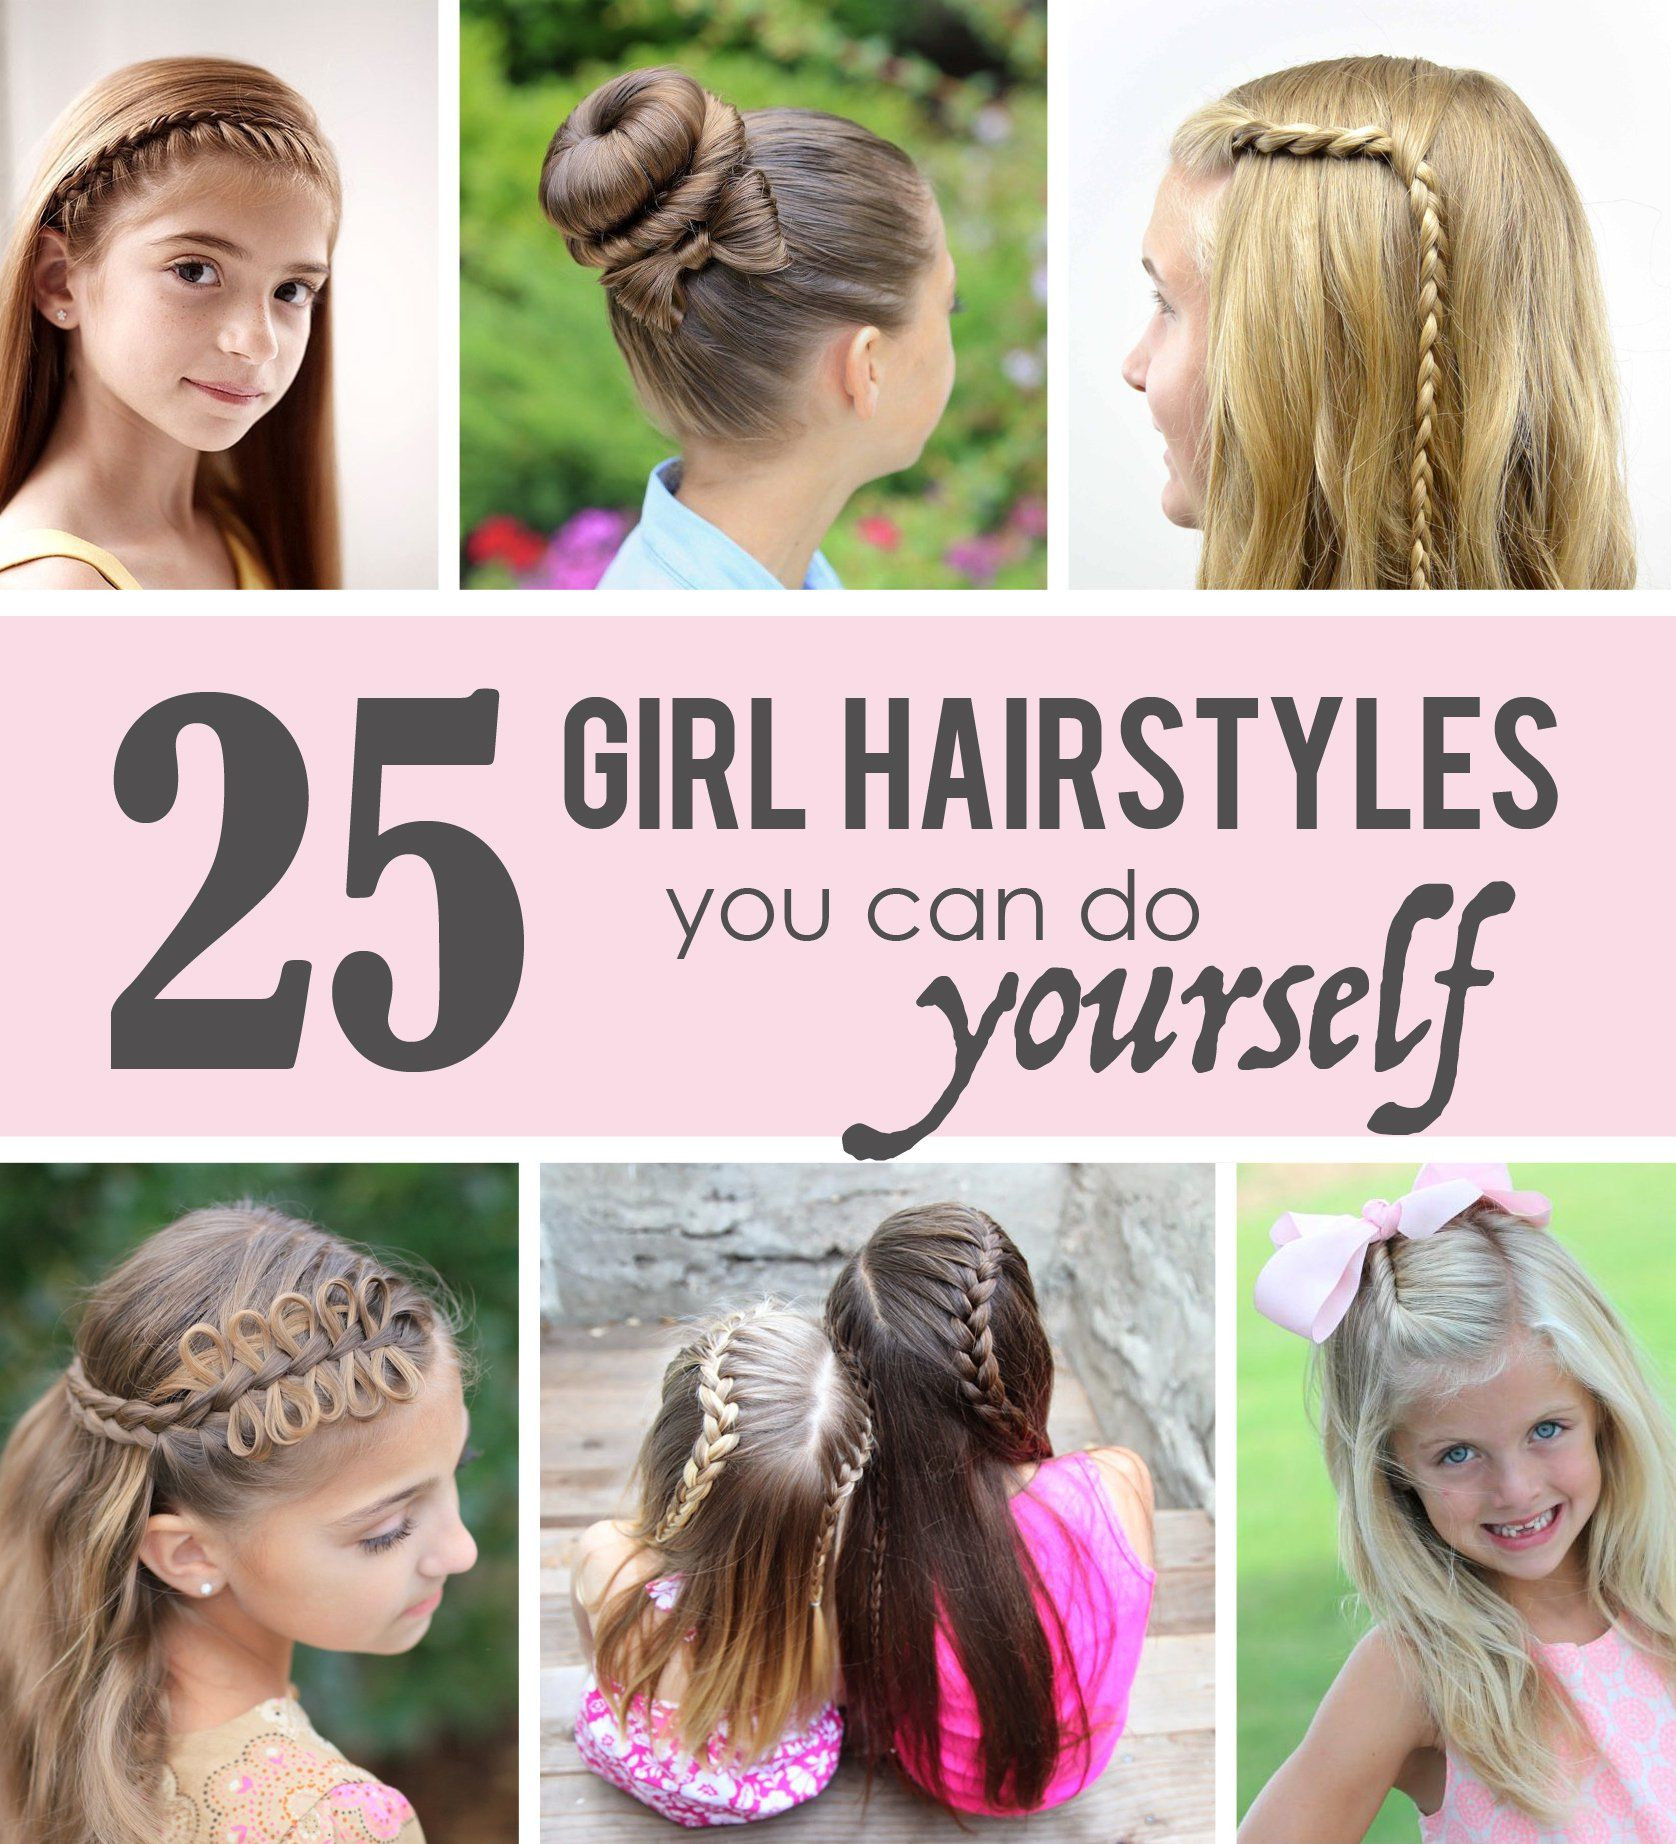 Easy Hairstyles To Do Yourself For School
 25 Little Girl Hairstyles…you can do YOURSELF